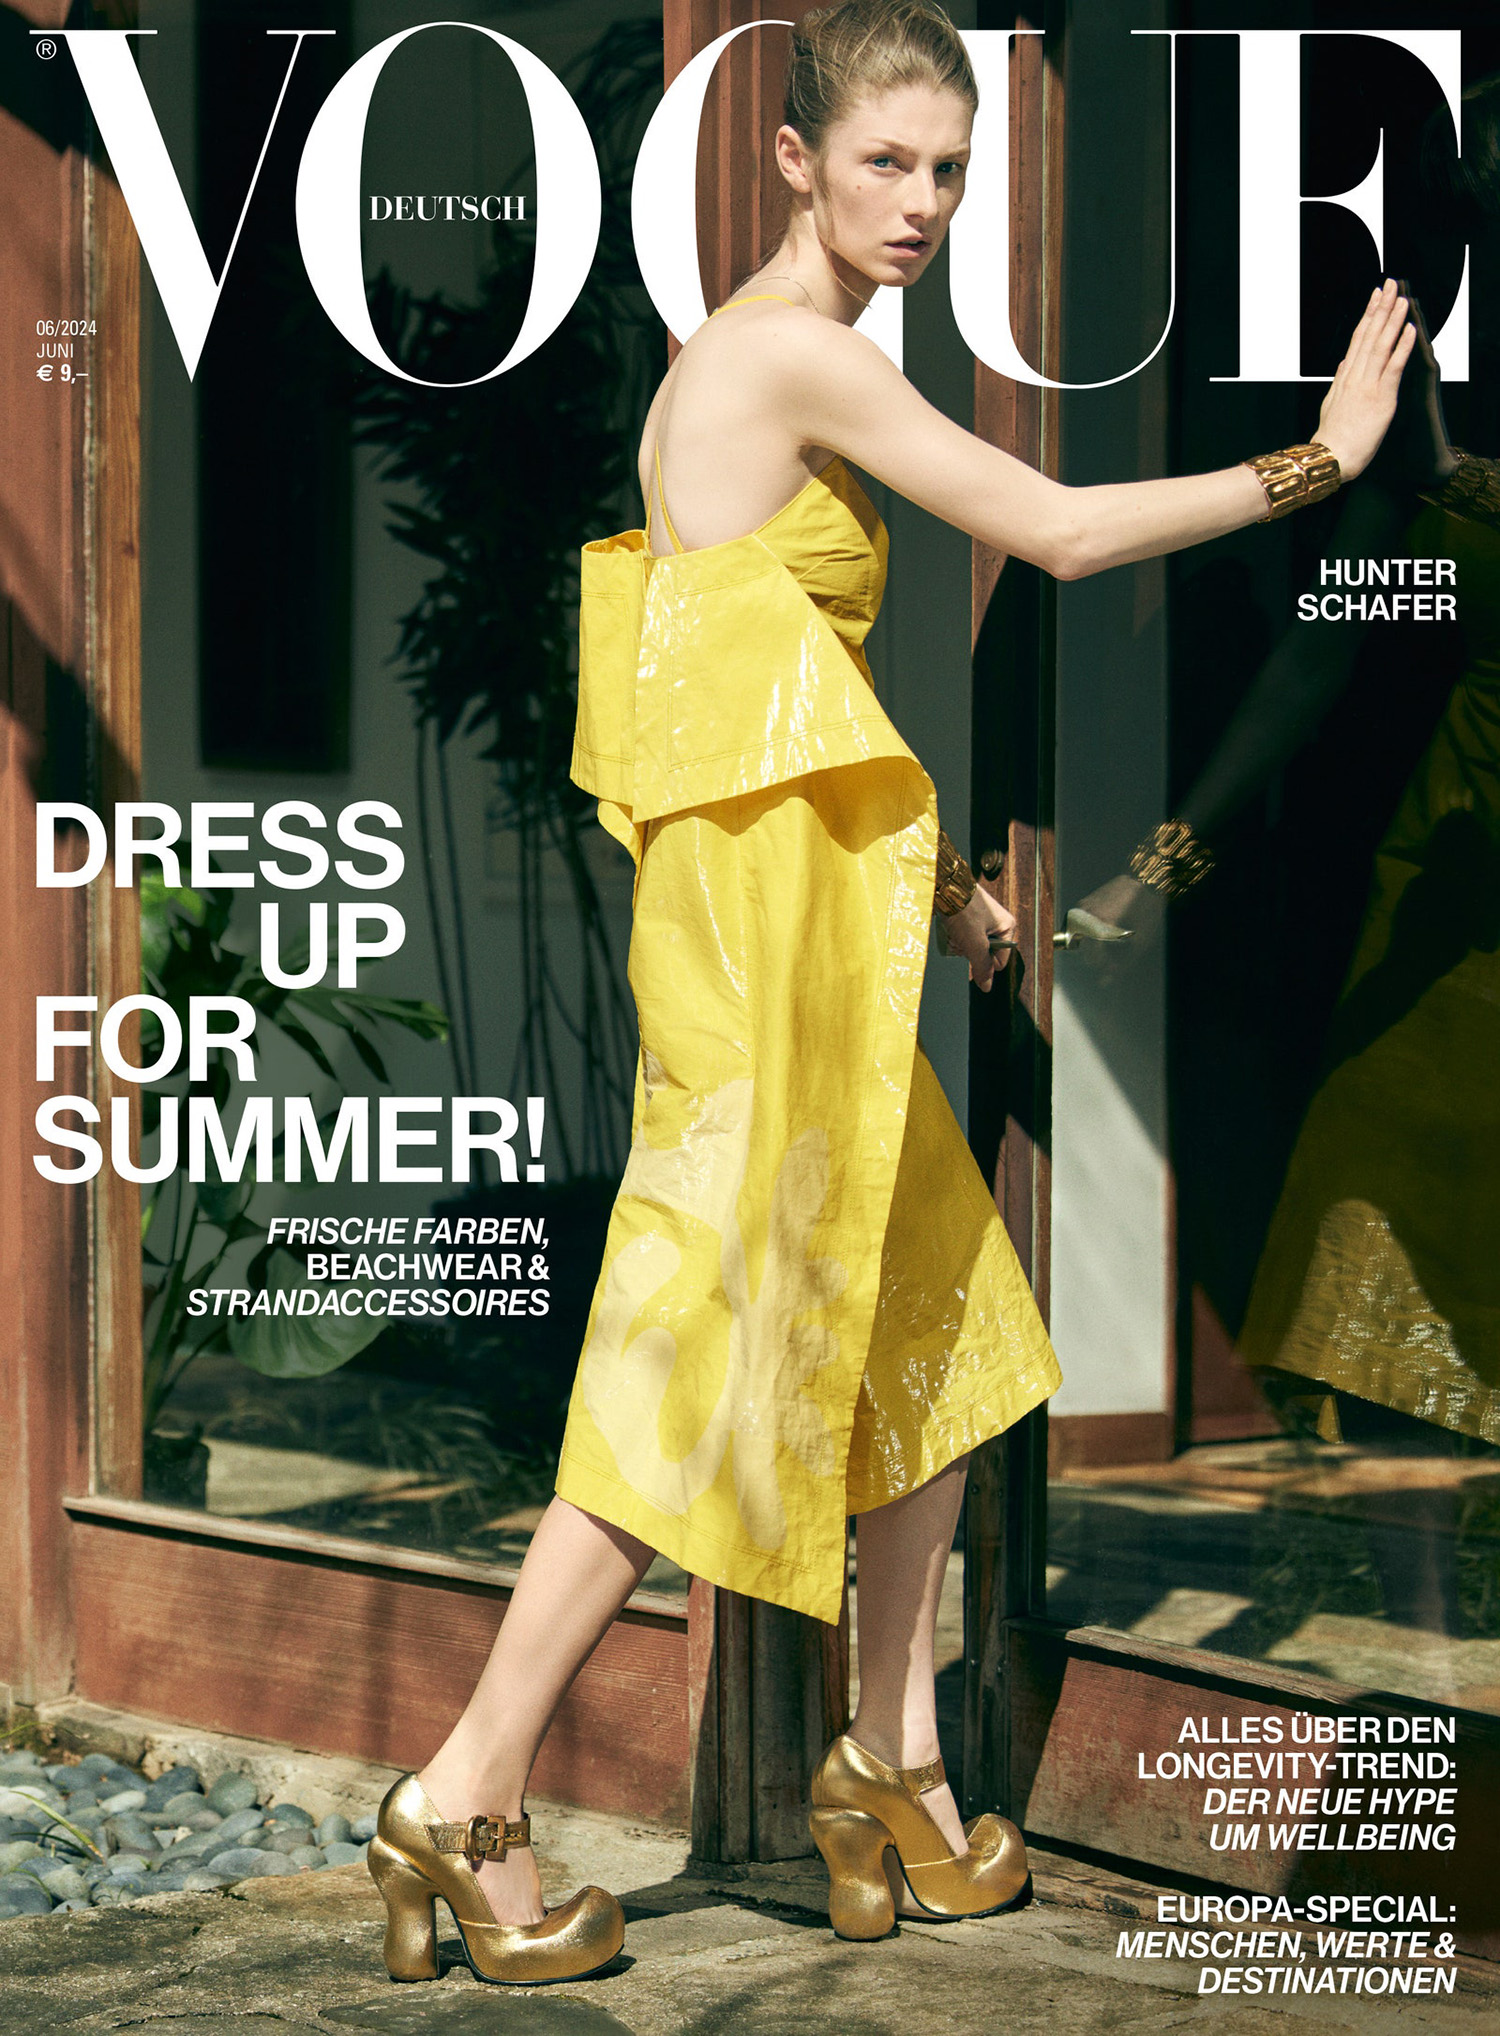 Hunter Schafer covers Vogue Italia and Vogue Germany June 2024 by Ethan James Green